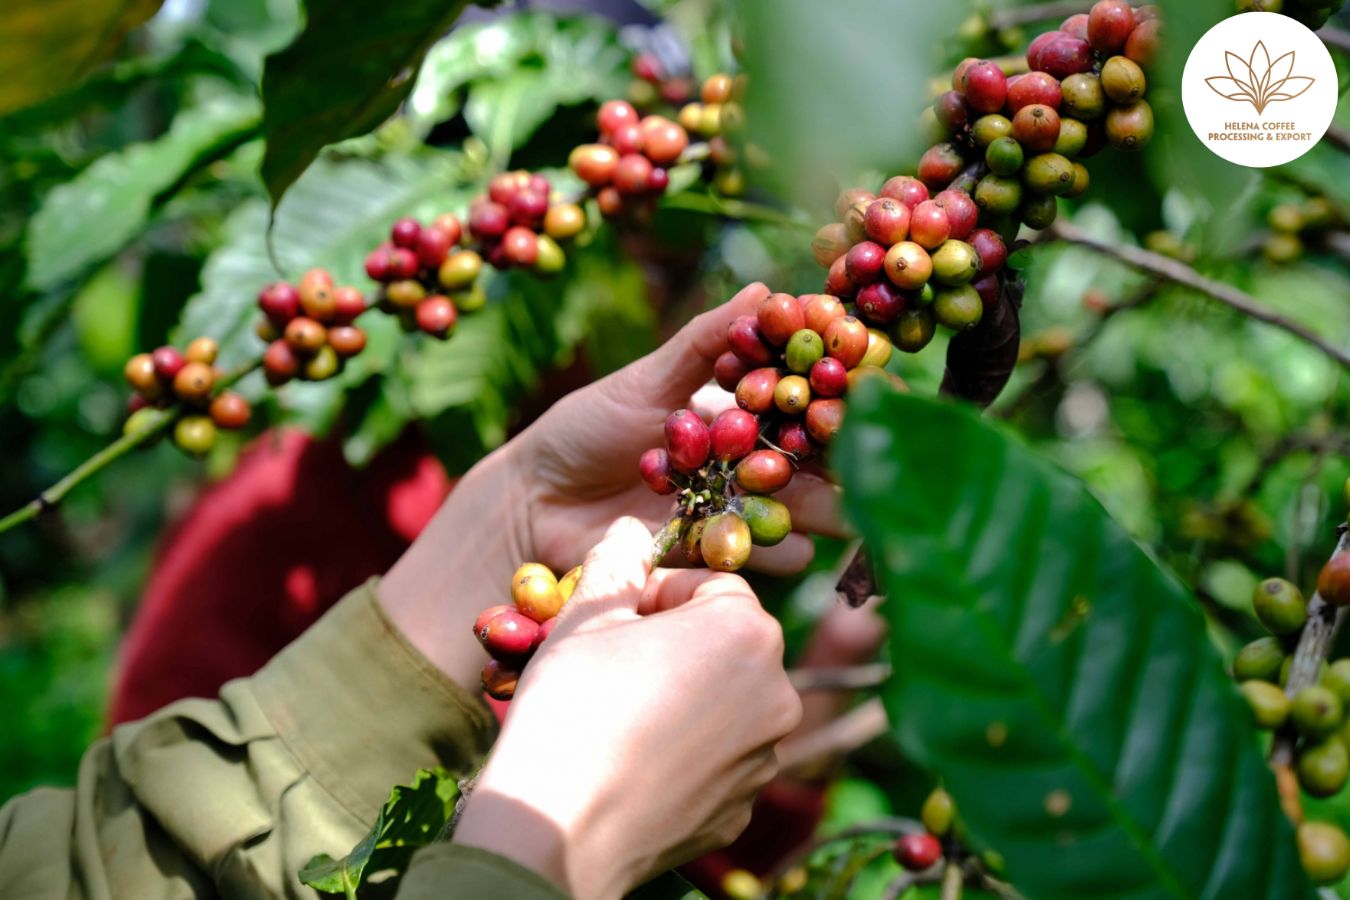 second Largest Coffee Exporter In The World